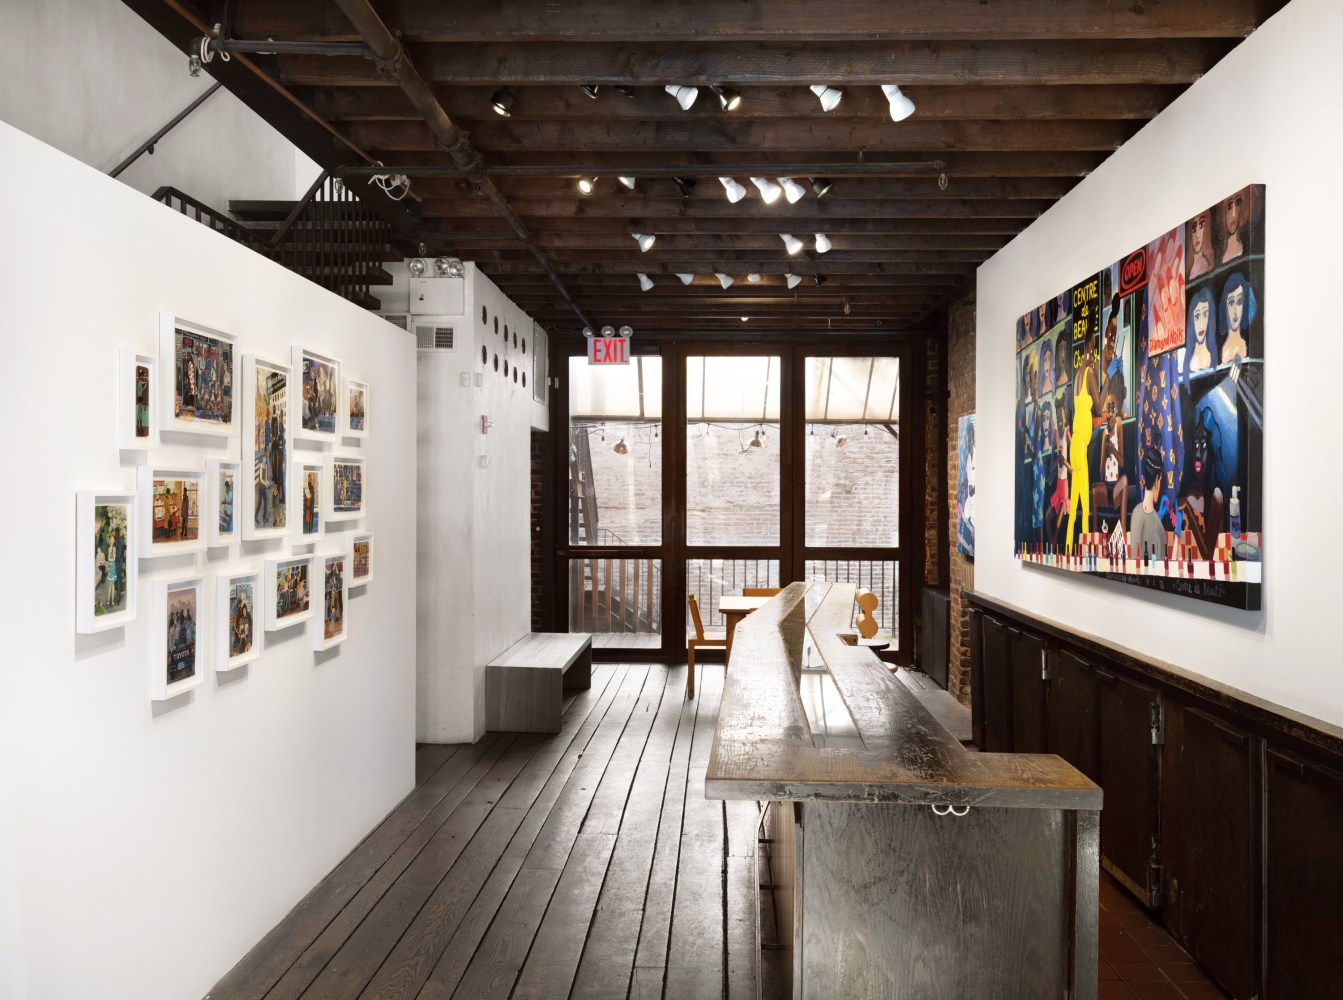 An image of the front lobby of the gallery with a large painting and mini framed prints